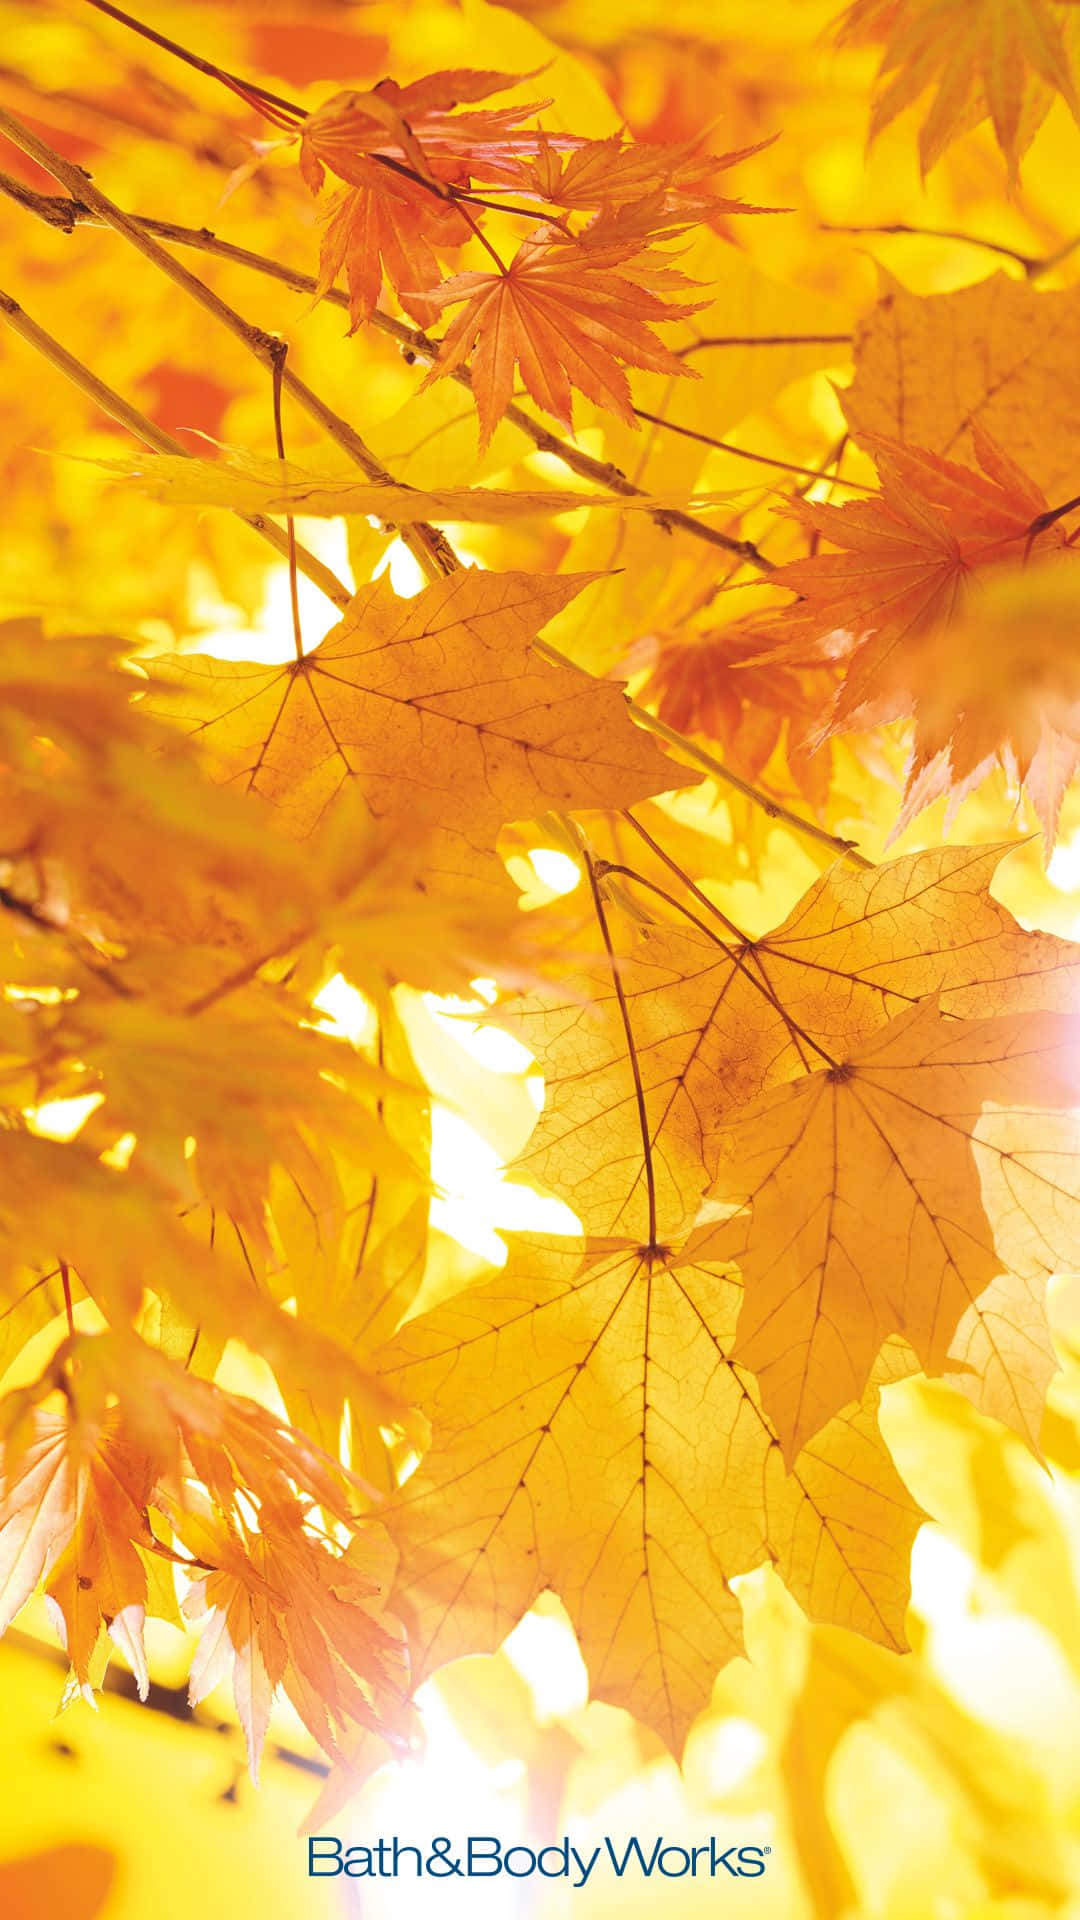 Enjoy the changing of the seasons with this vibrant autumn leaves phone wallpaper. Wallpaper